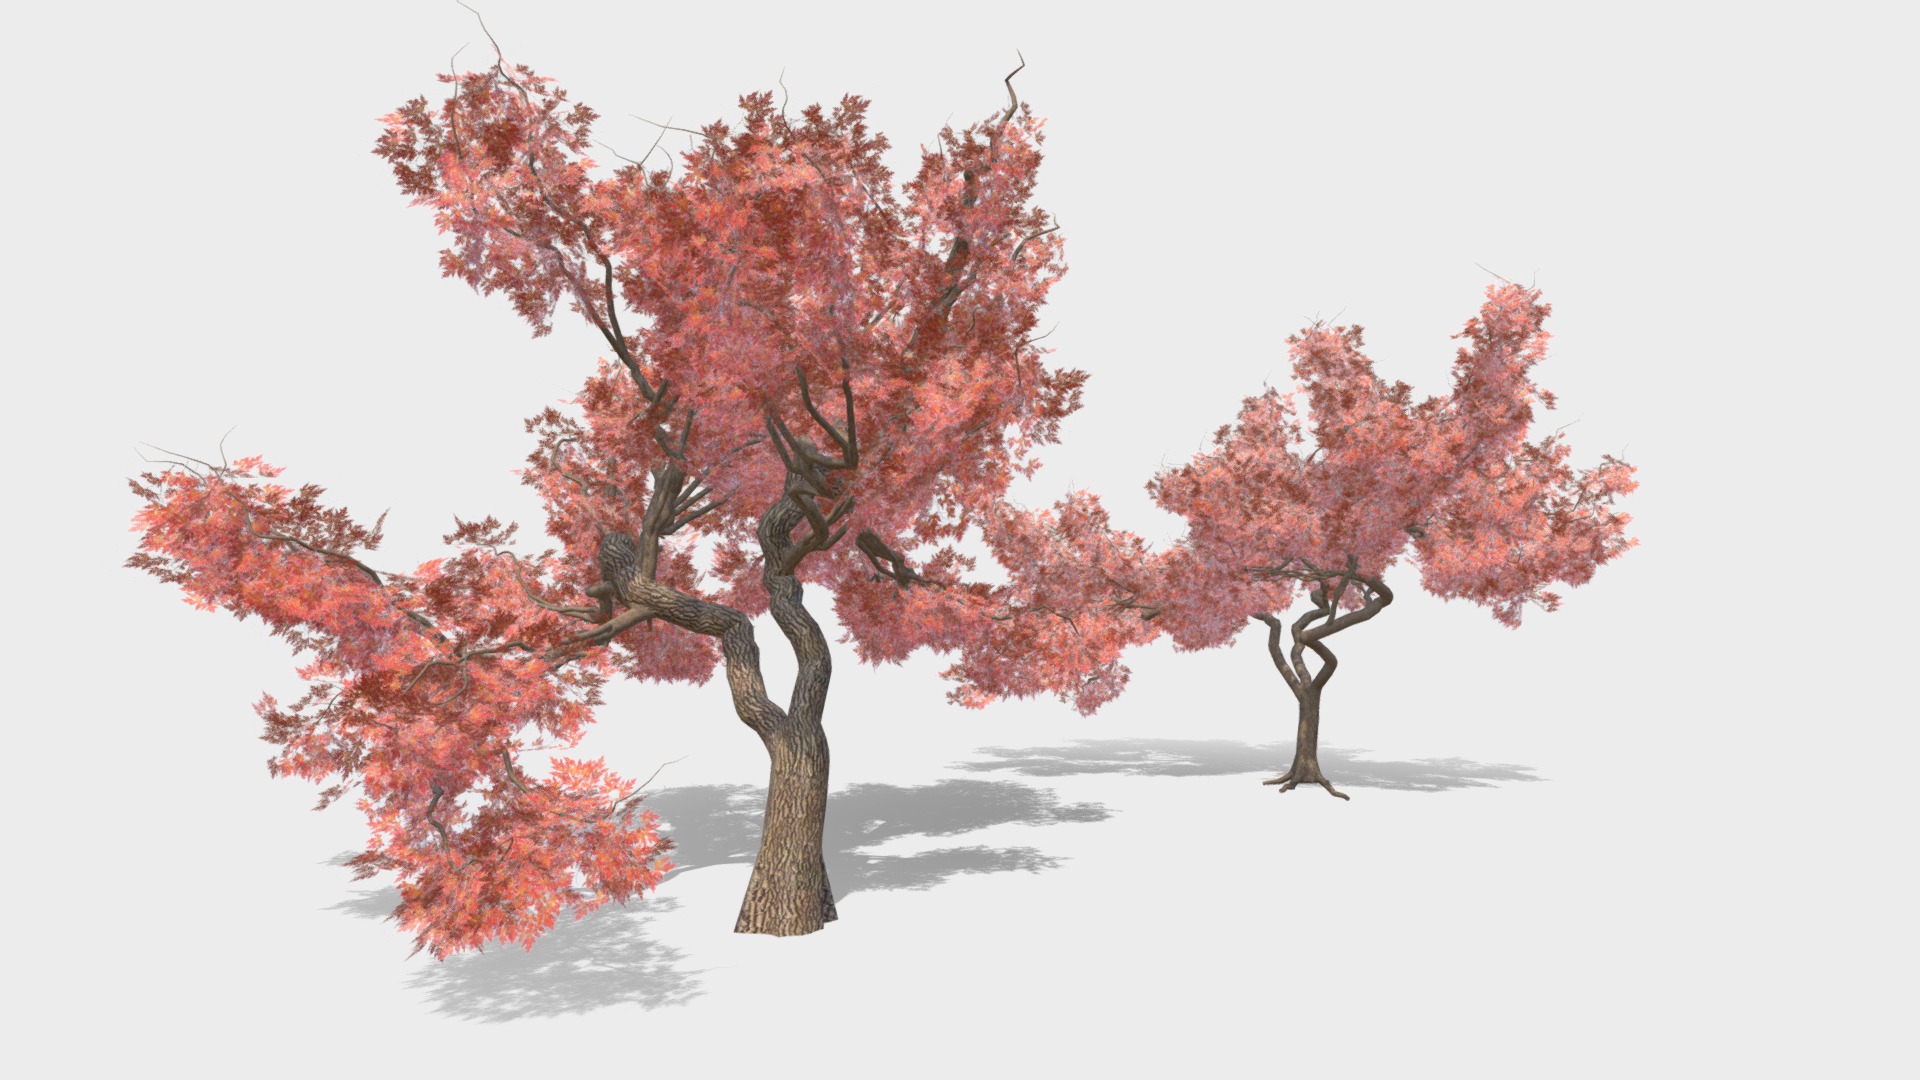 3D model Japanese Maple tree 2 versions - This is a 3D model of the Japanese Maple tree 2 versions. The 3D model is about a group of trees with red leaves.